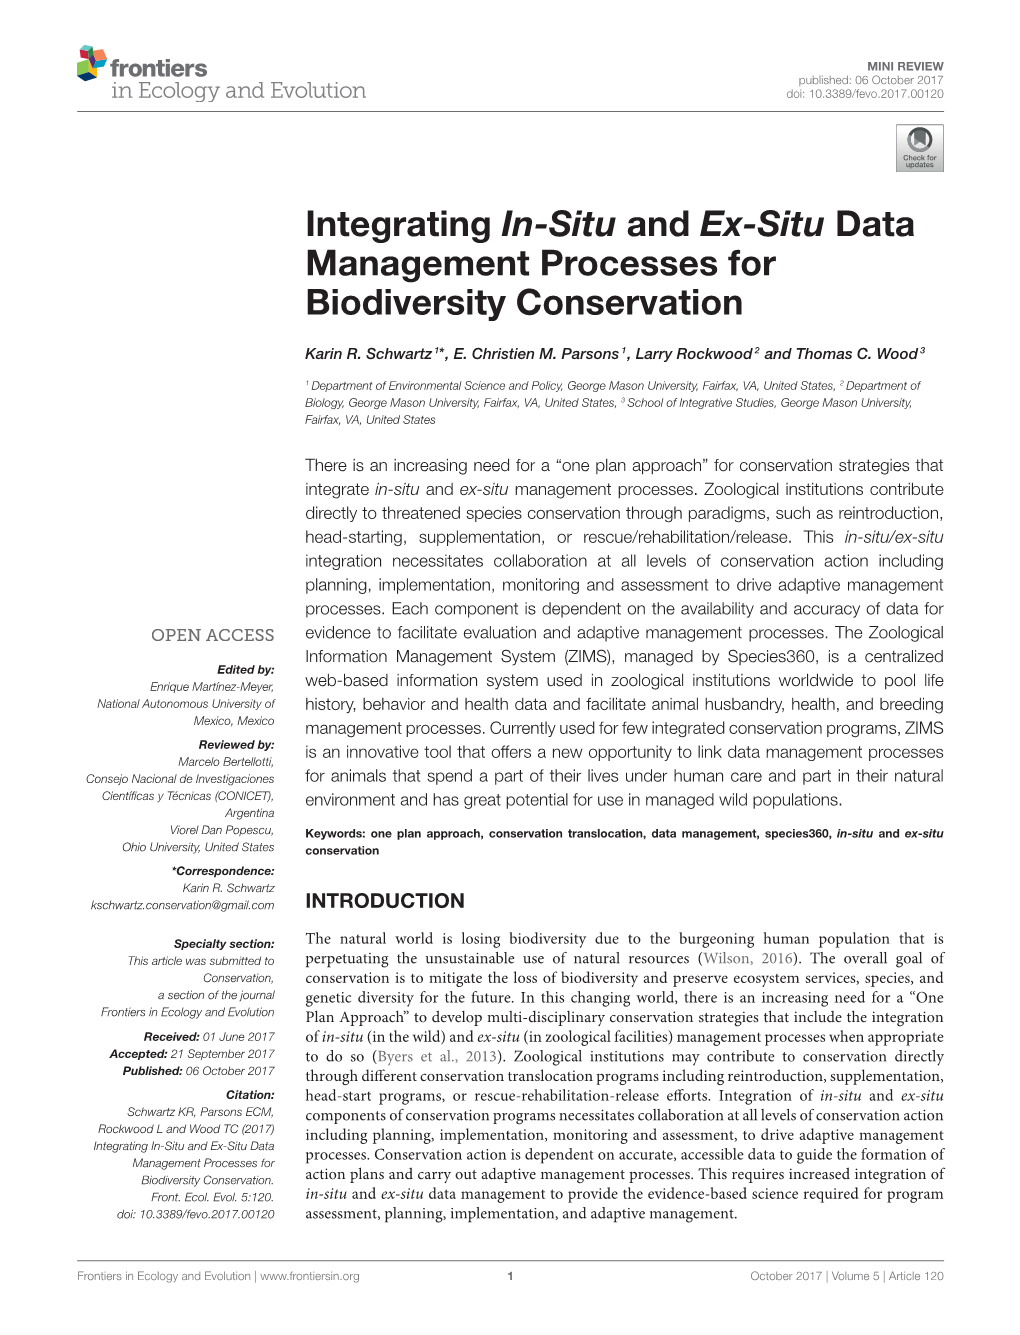 Integrating In-Situ and Ex-Situ Data Management Processes for Biodiversity Conservation